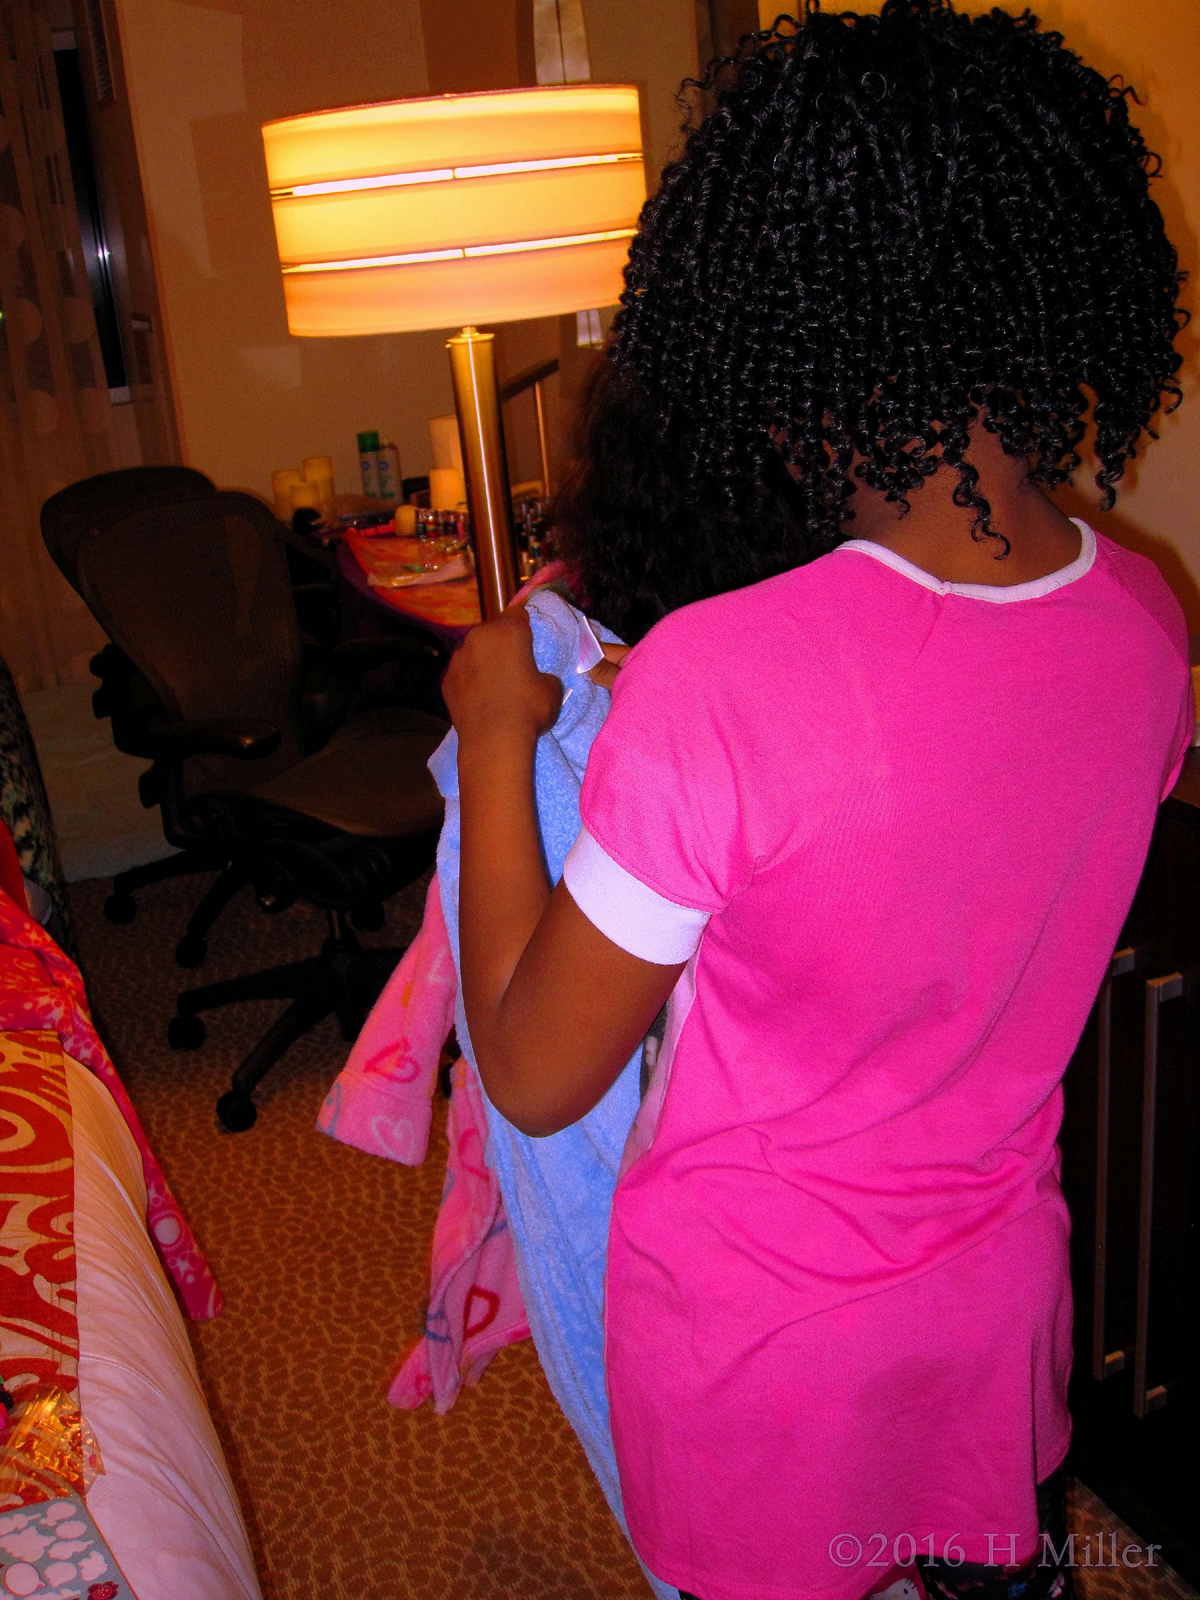 Putting On The Blue Spa Robe 